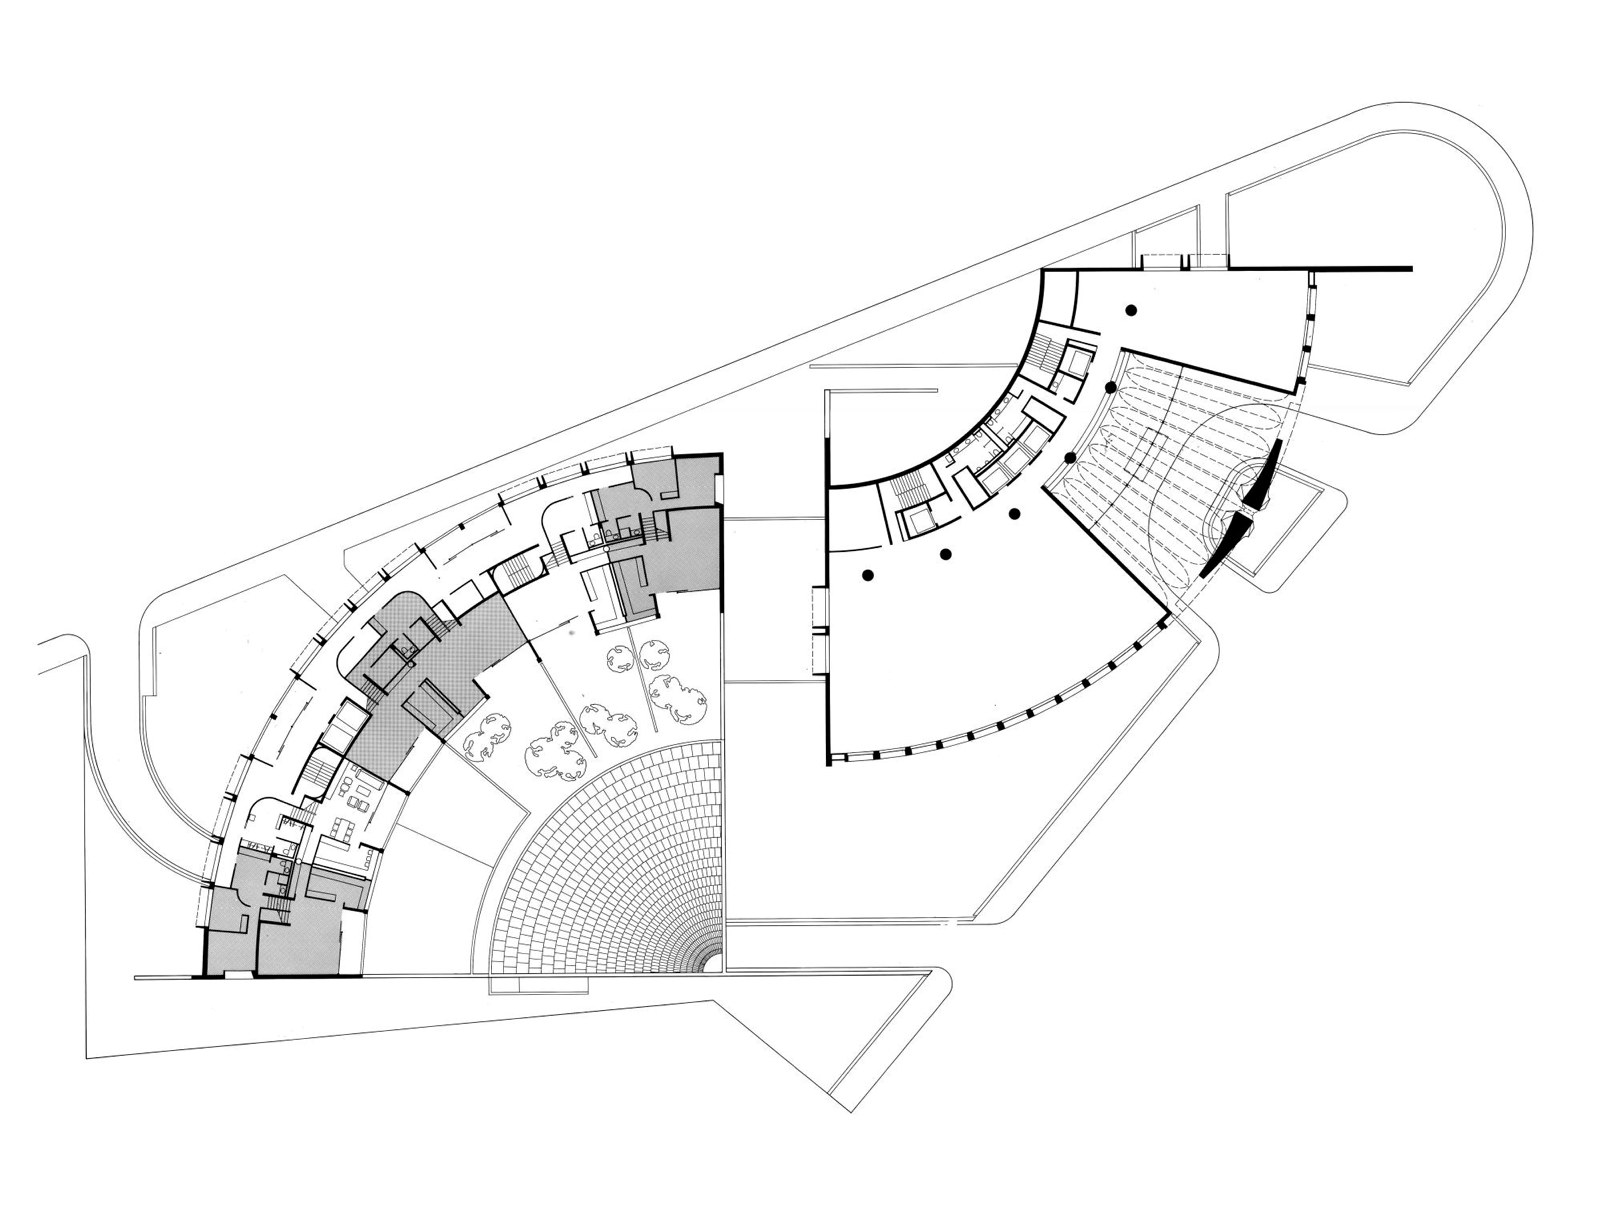 This is a digital image of the floor plan of a building based on the shape of two curving quadrants